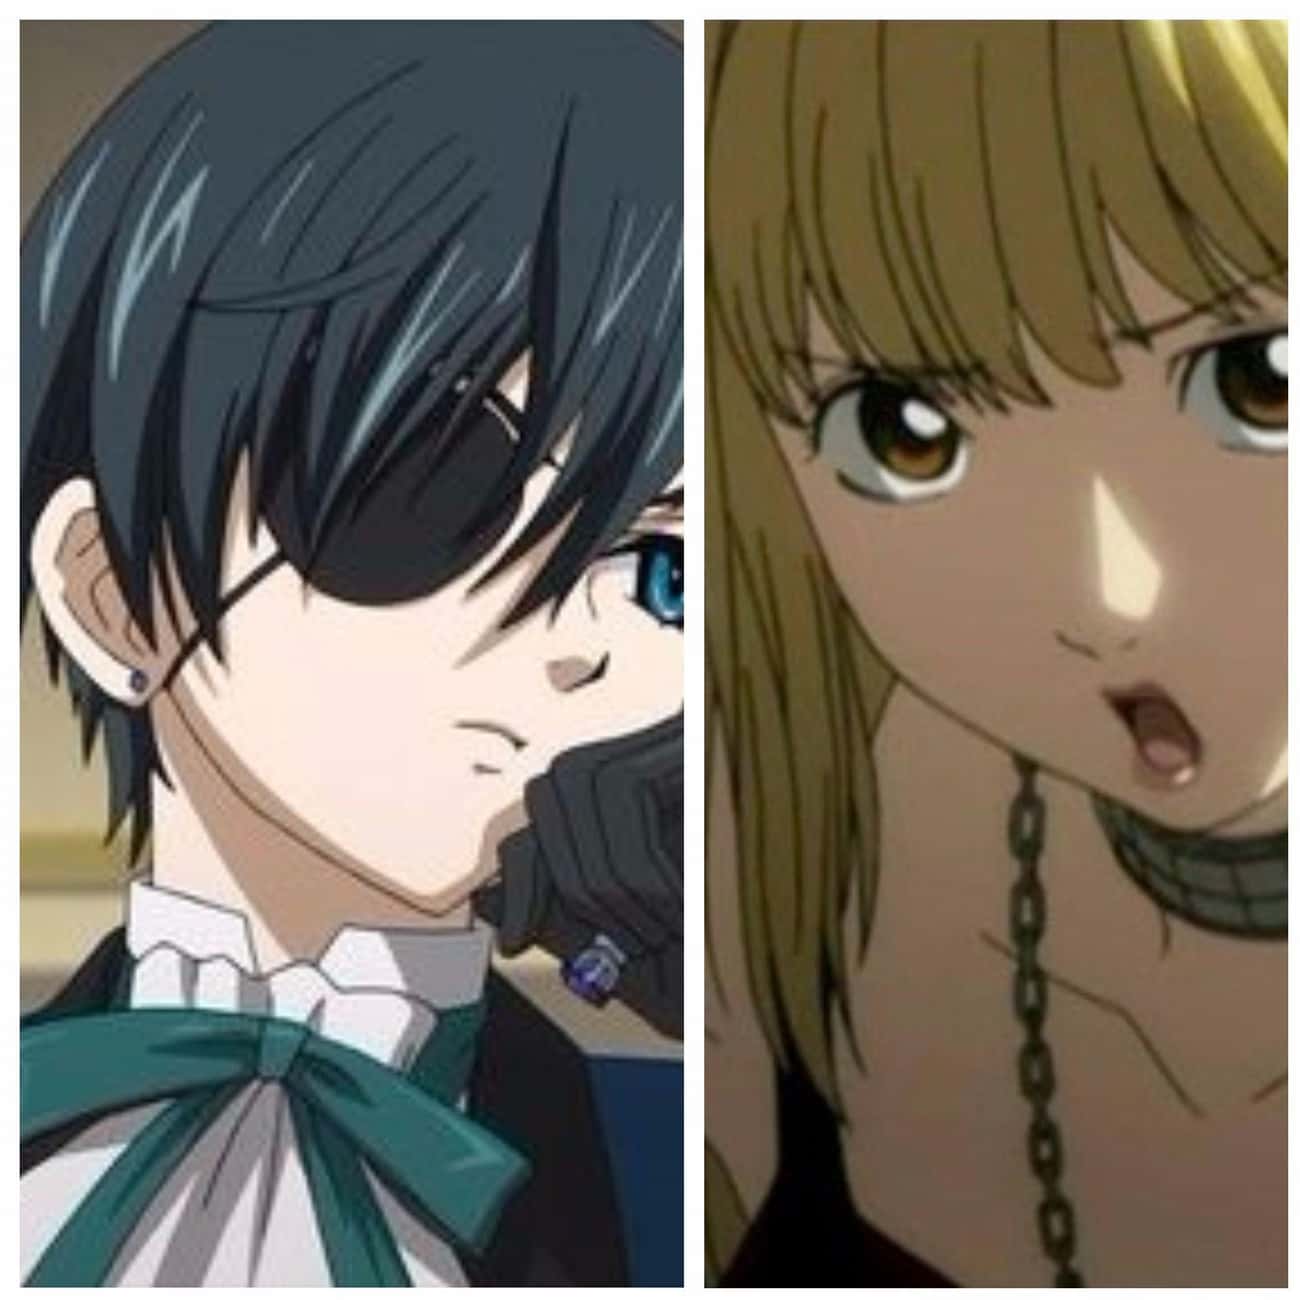 Ciel Phantomhive From Black Butler And Misa Amane From Death Note